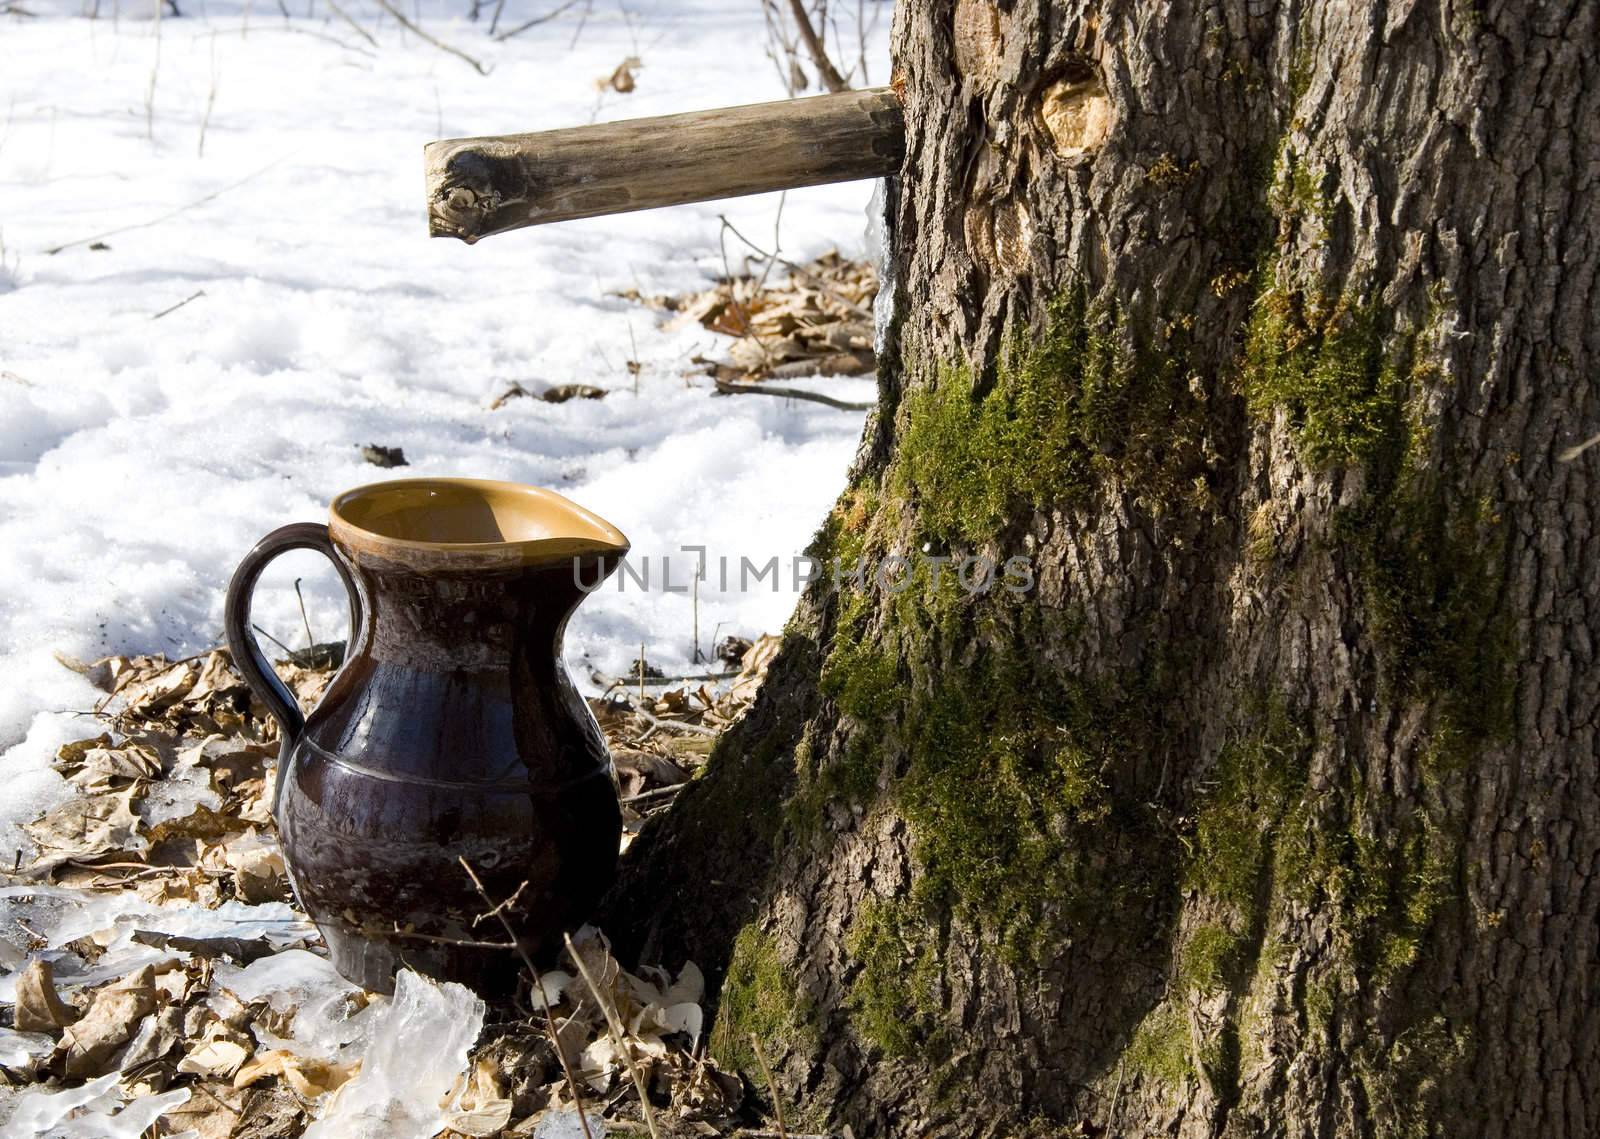 Maple sap is flowing into the pitcher surrounded by still undissolved snow